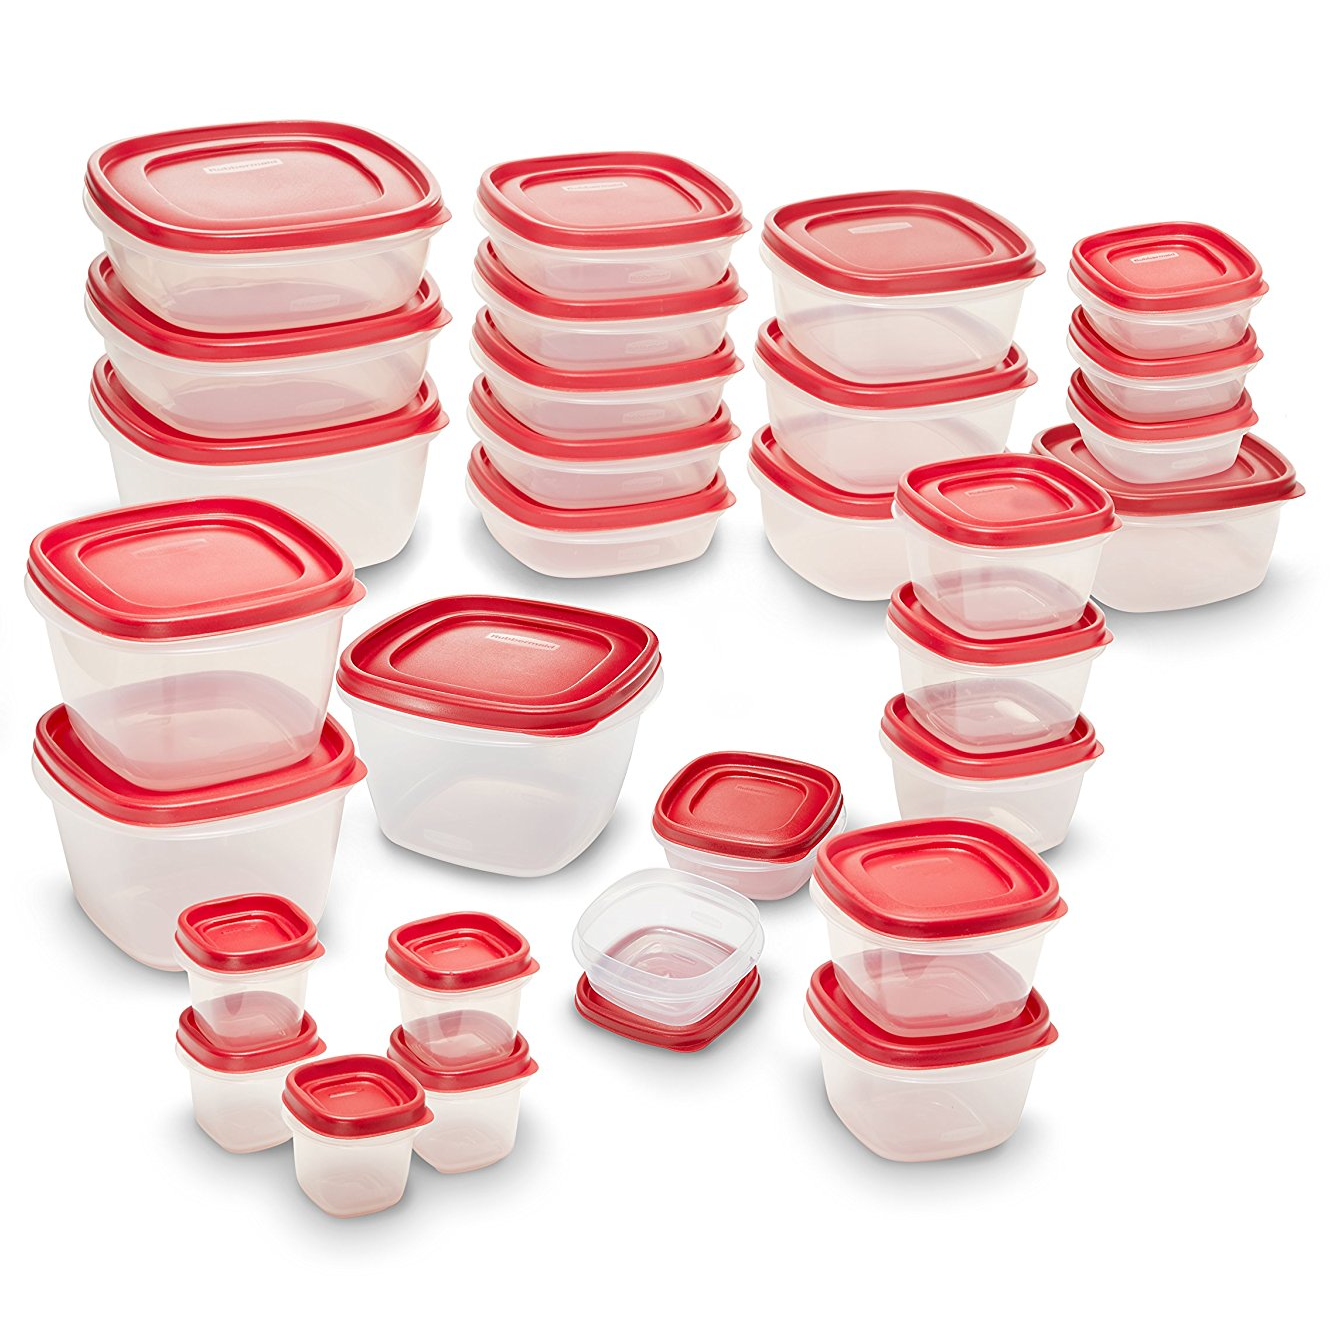 Rubbermaid Easy Find Lids Food Storage Container 60 Piece Set Only $27.19!